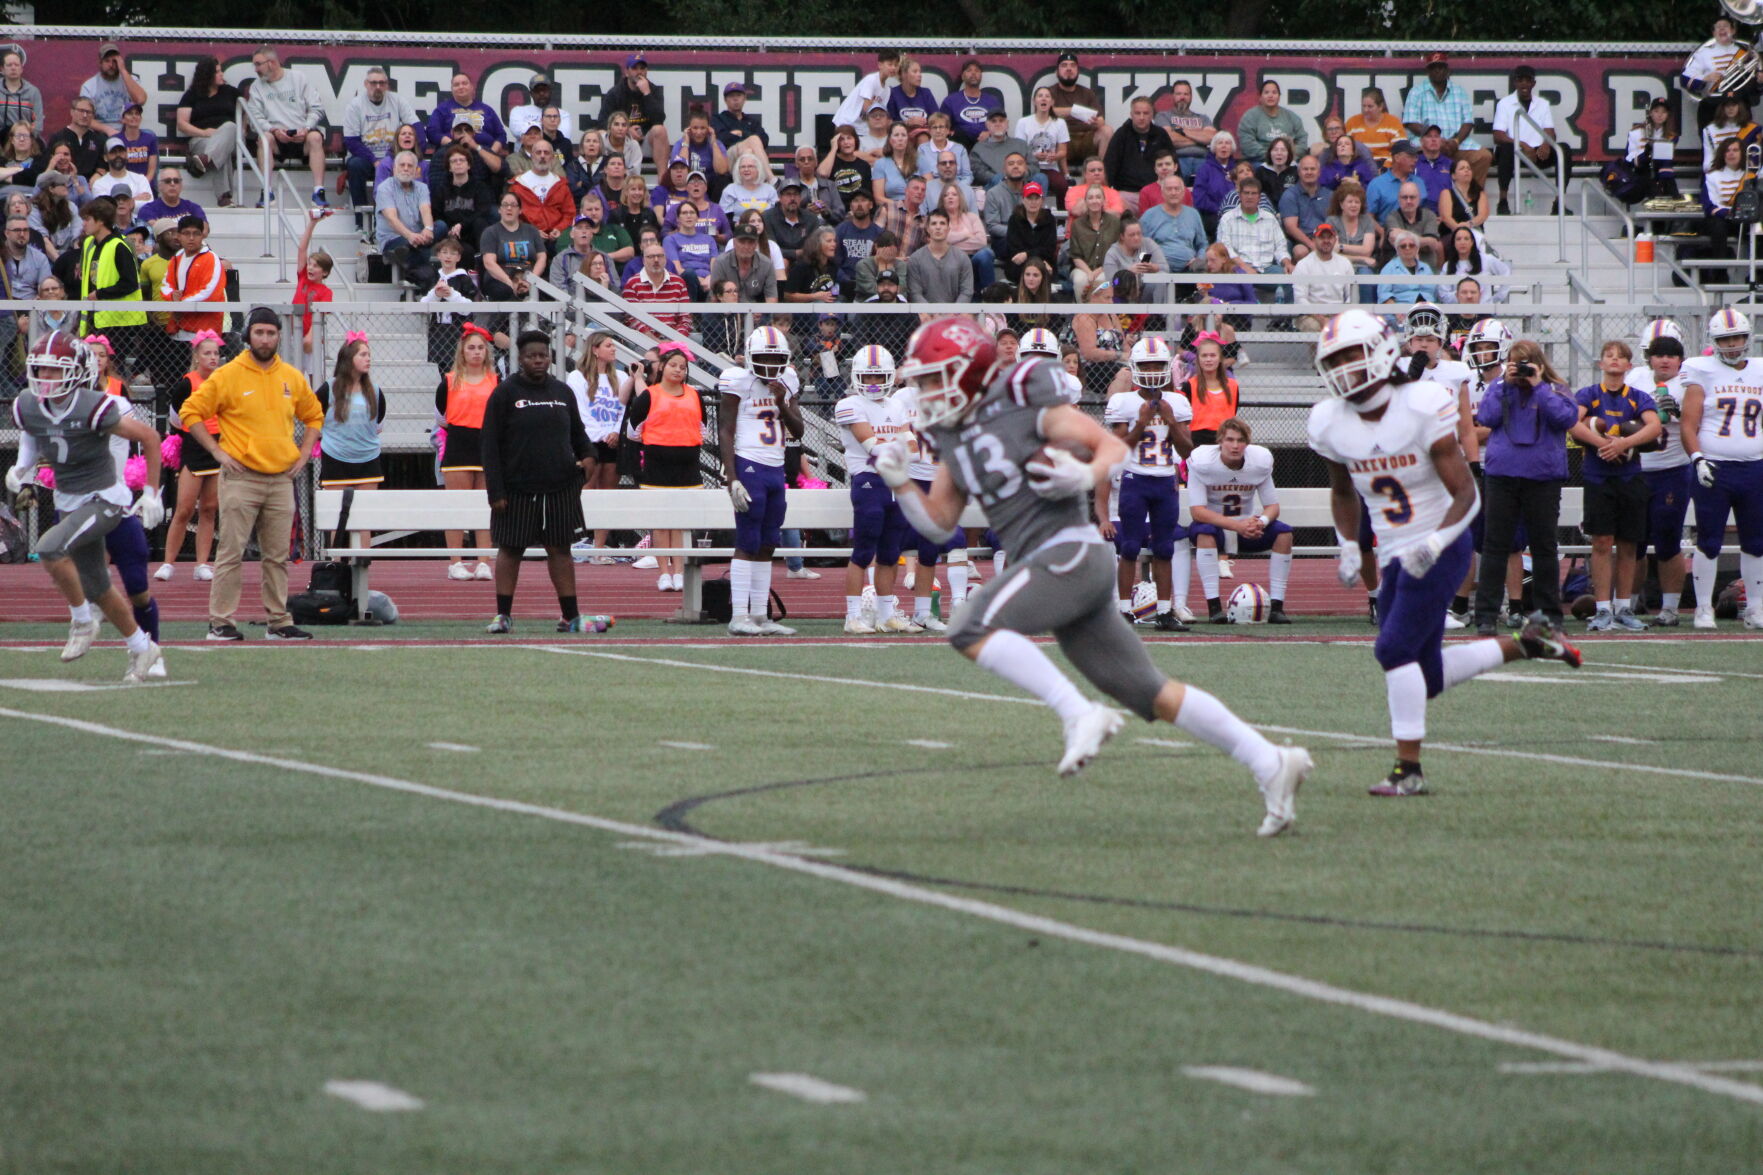 Rocky River Pirates Dominate Lakewood Rangers in 46-14 Victory